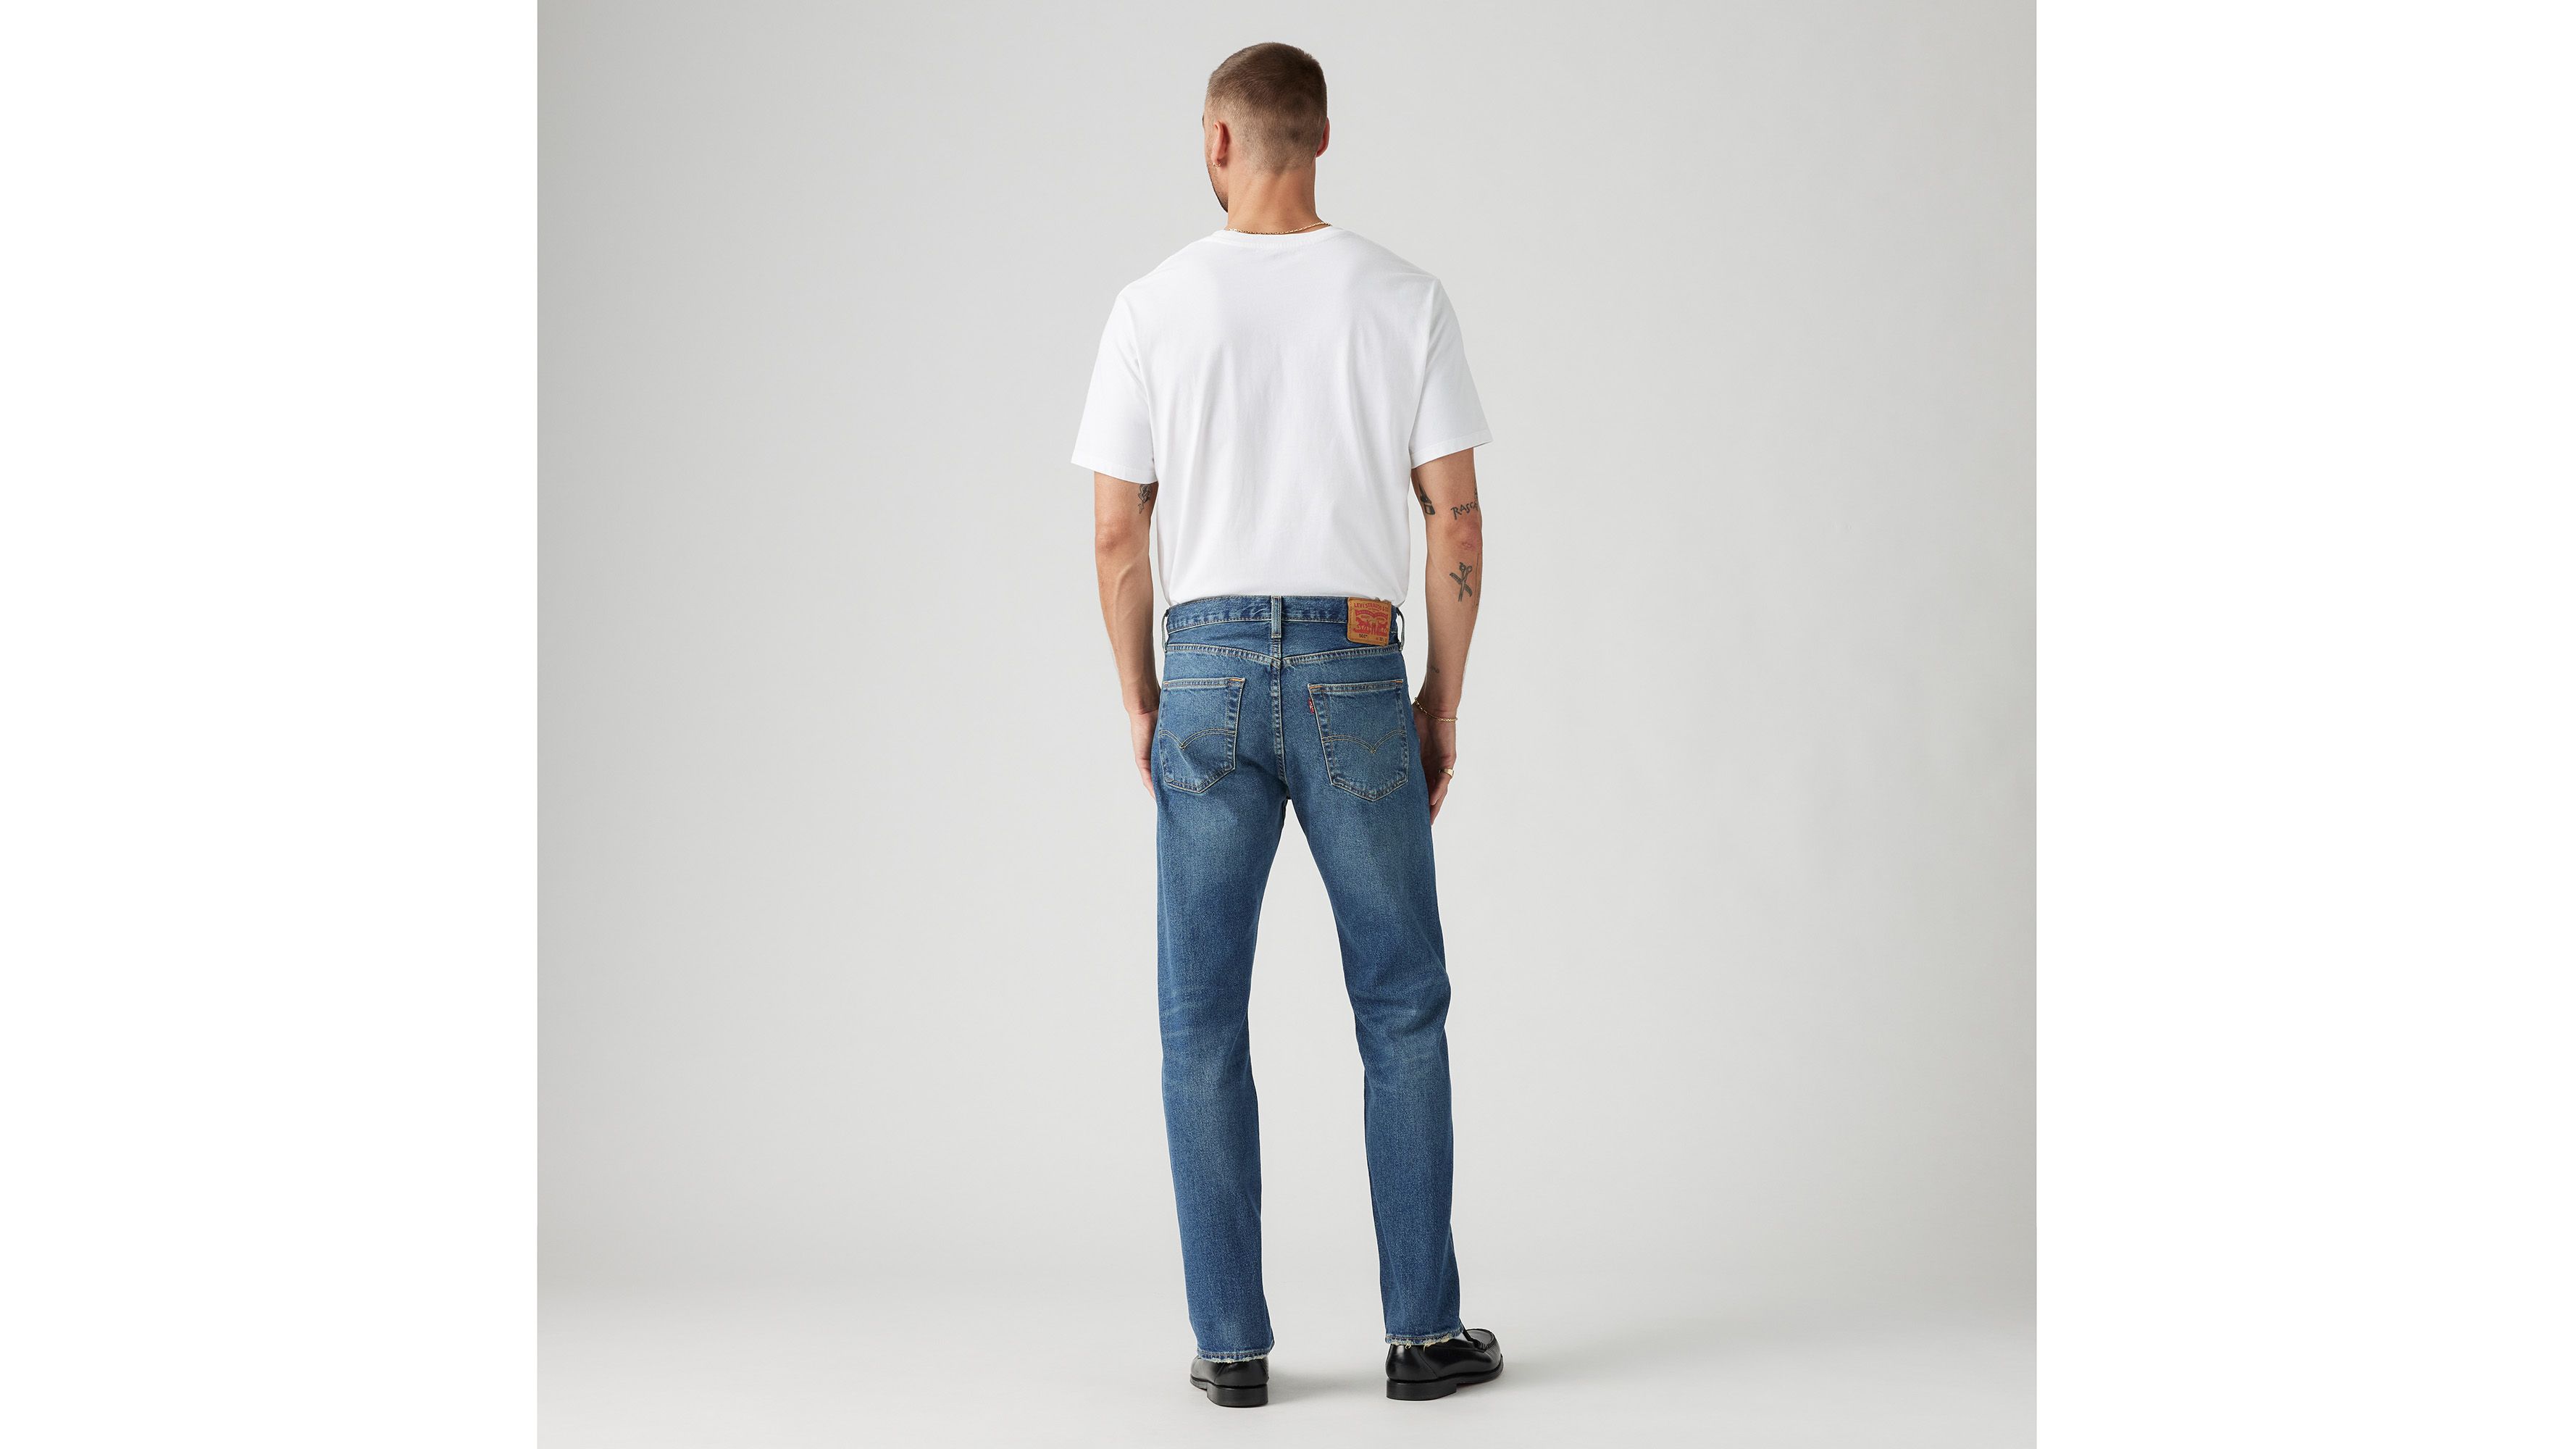 Back In Time: A Closer Look At Levi's Vintage Clothing : Levi Strauss & Co